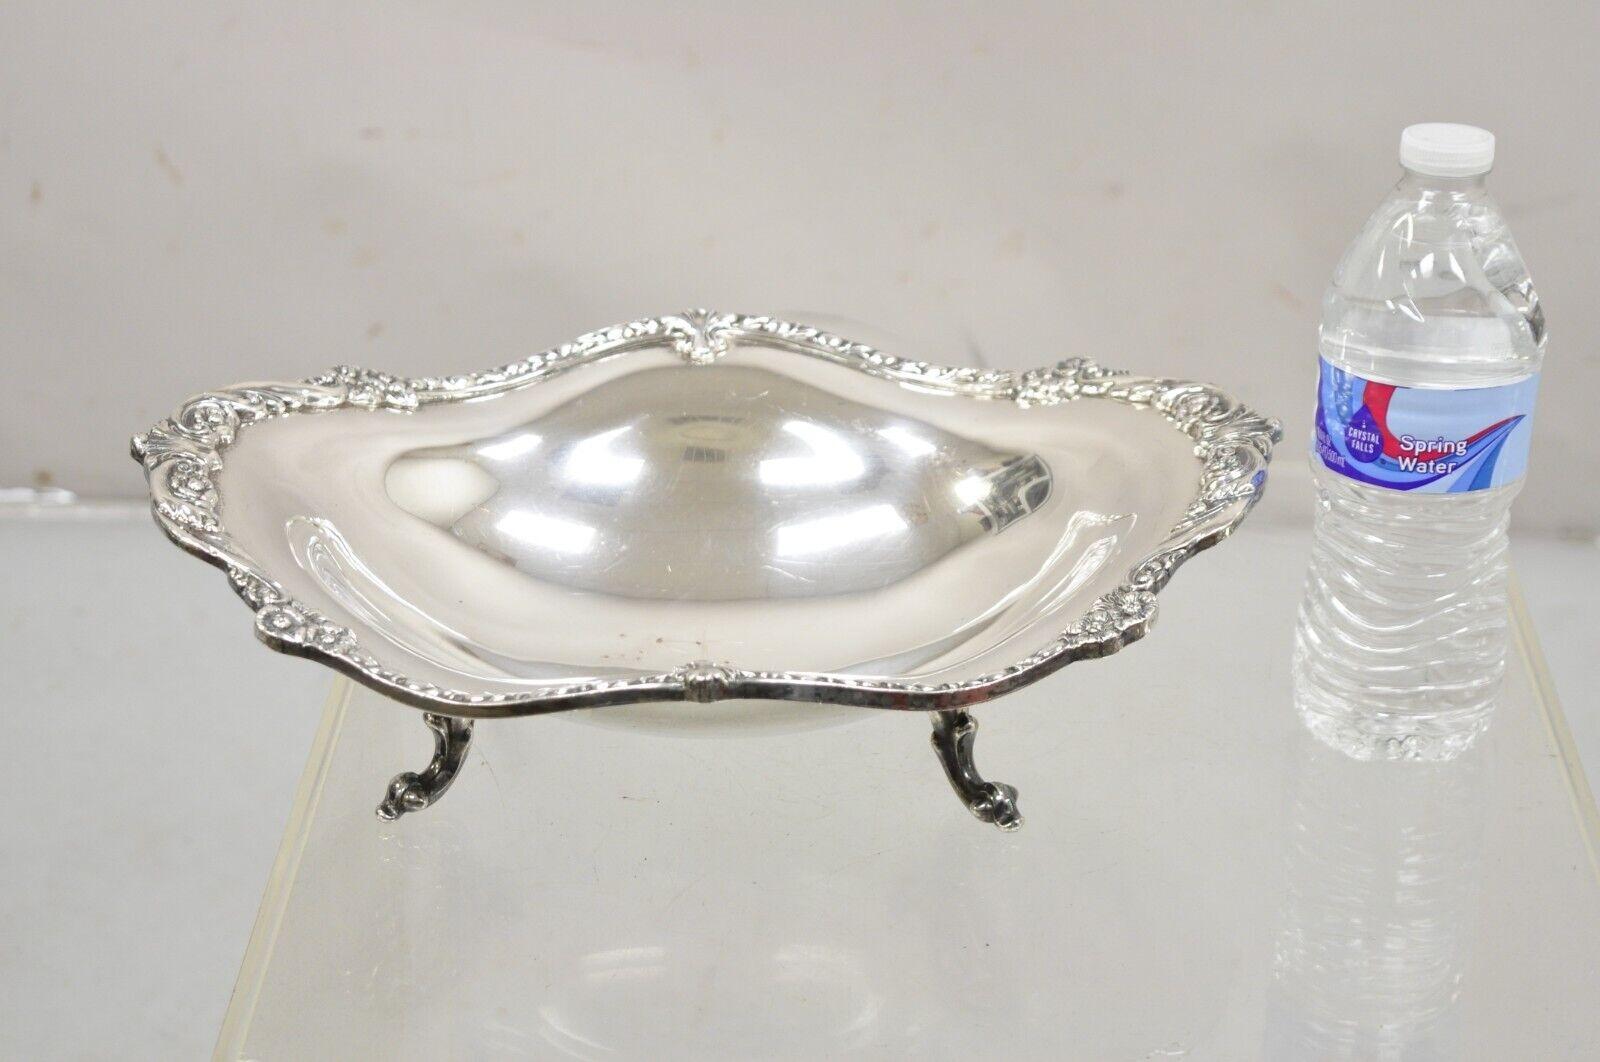 Vintage Sheridan Victorian Style Silver Plated Footed Scalloped Oval Fruit Bowl. Circa Mid 20th Century. Measurements: 4